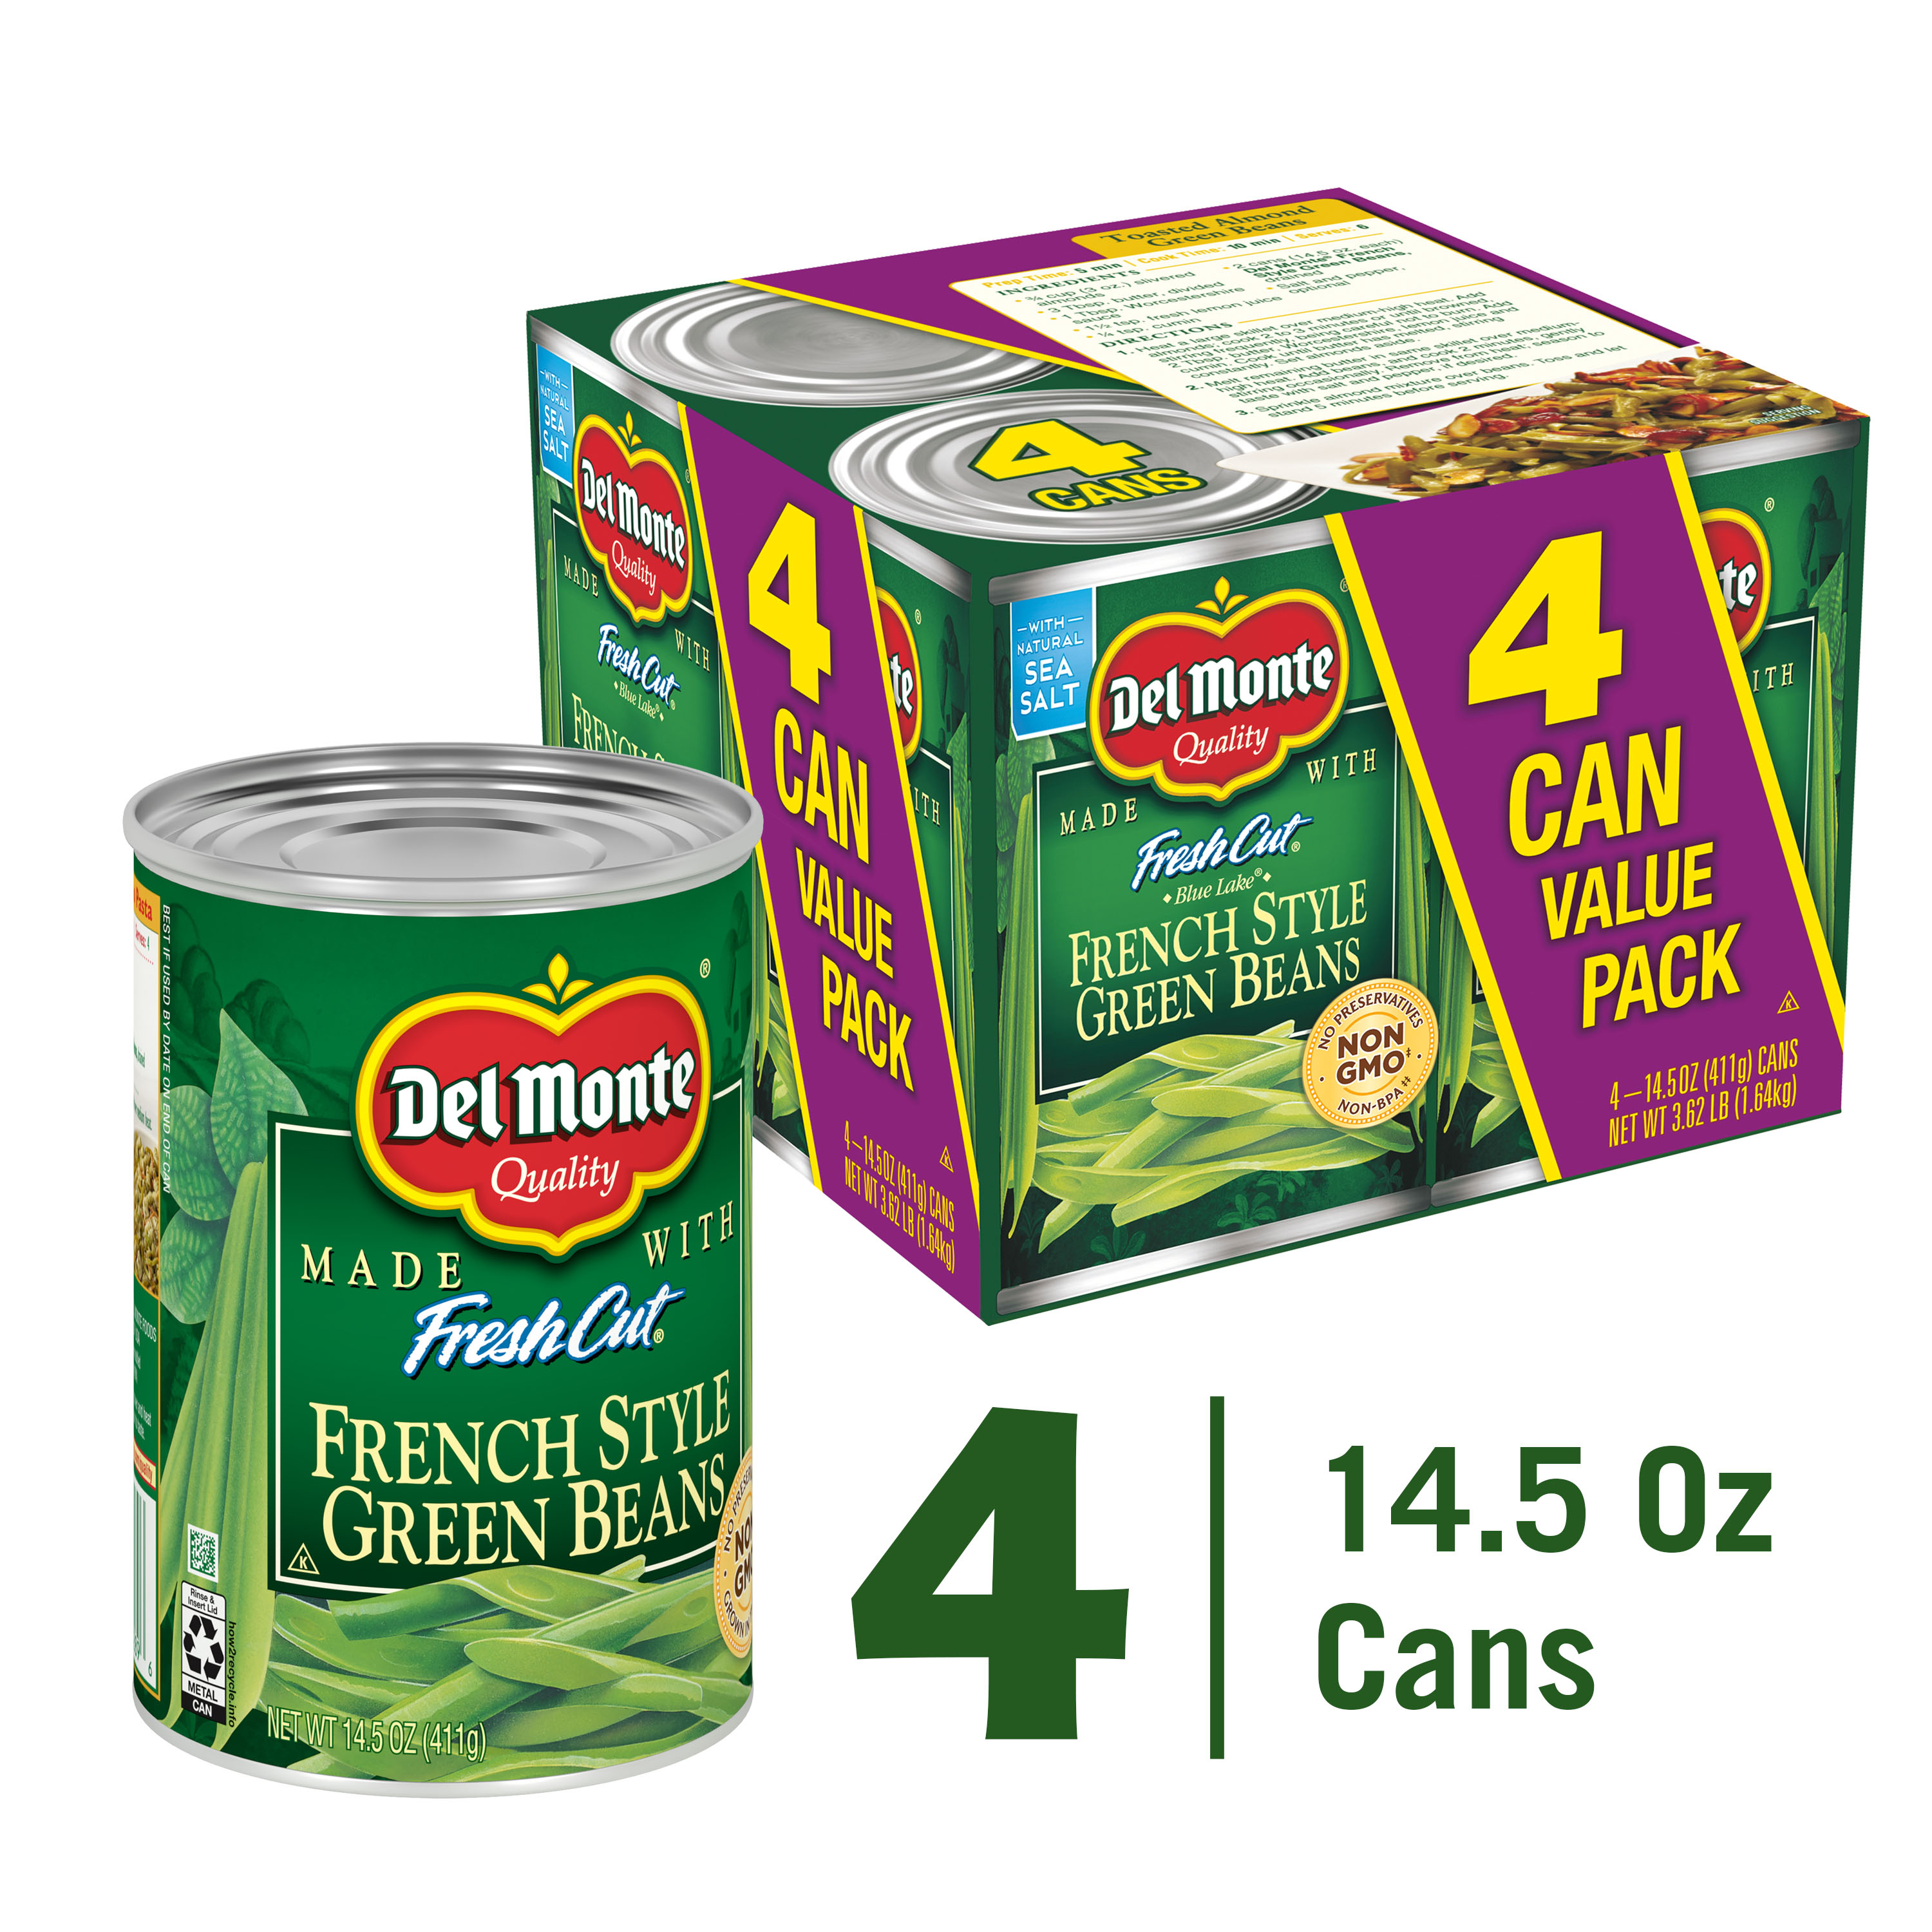 (4 Cans) Del Monte French Style Green Beans, 14.5 oz Can - image 2 of 7